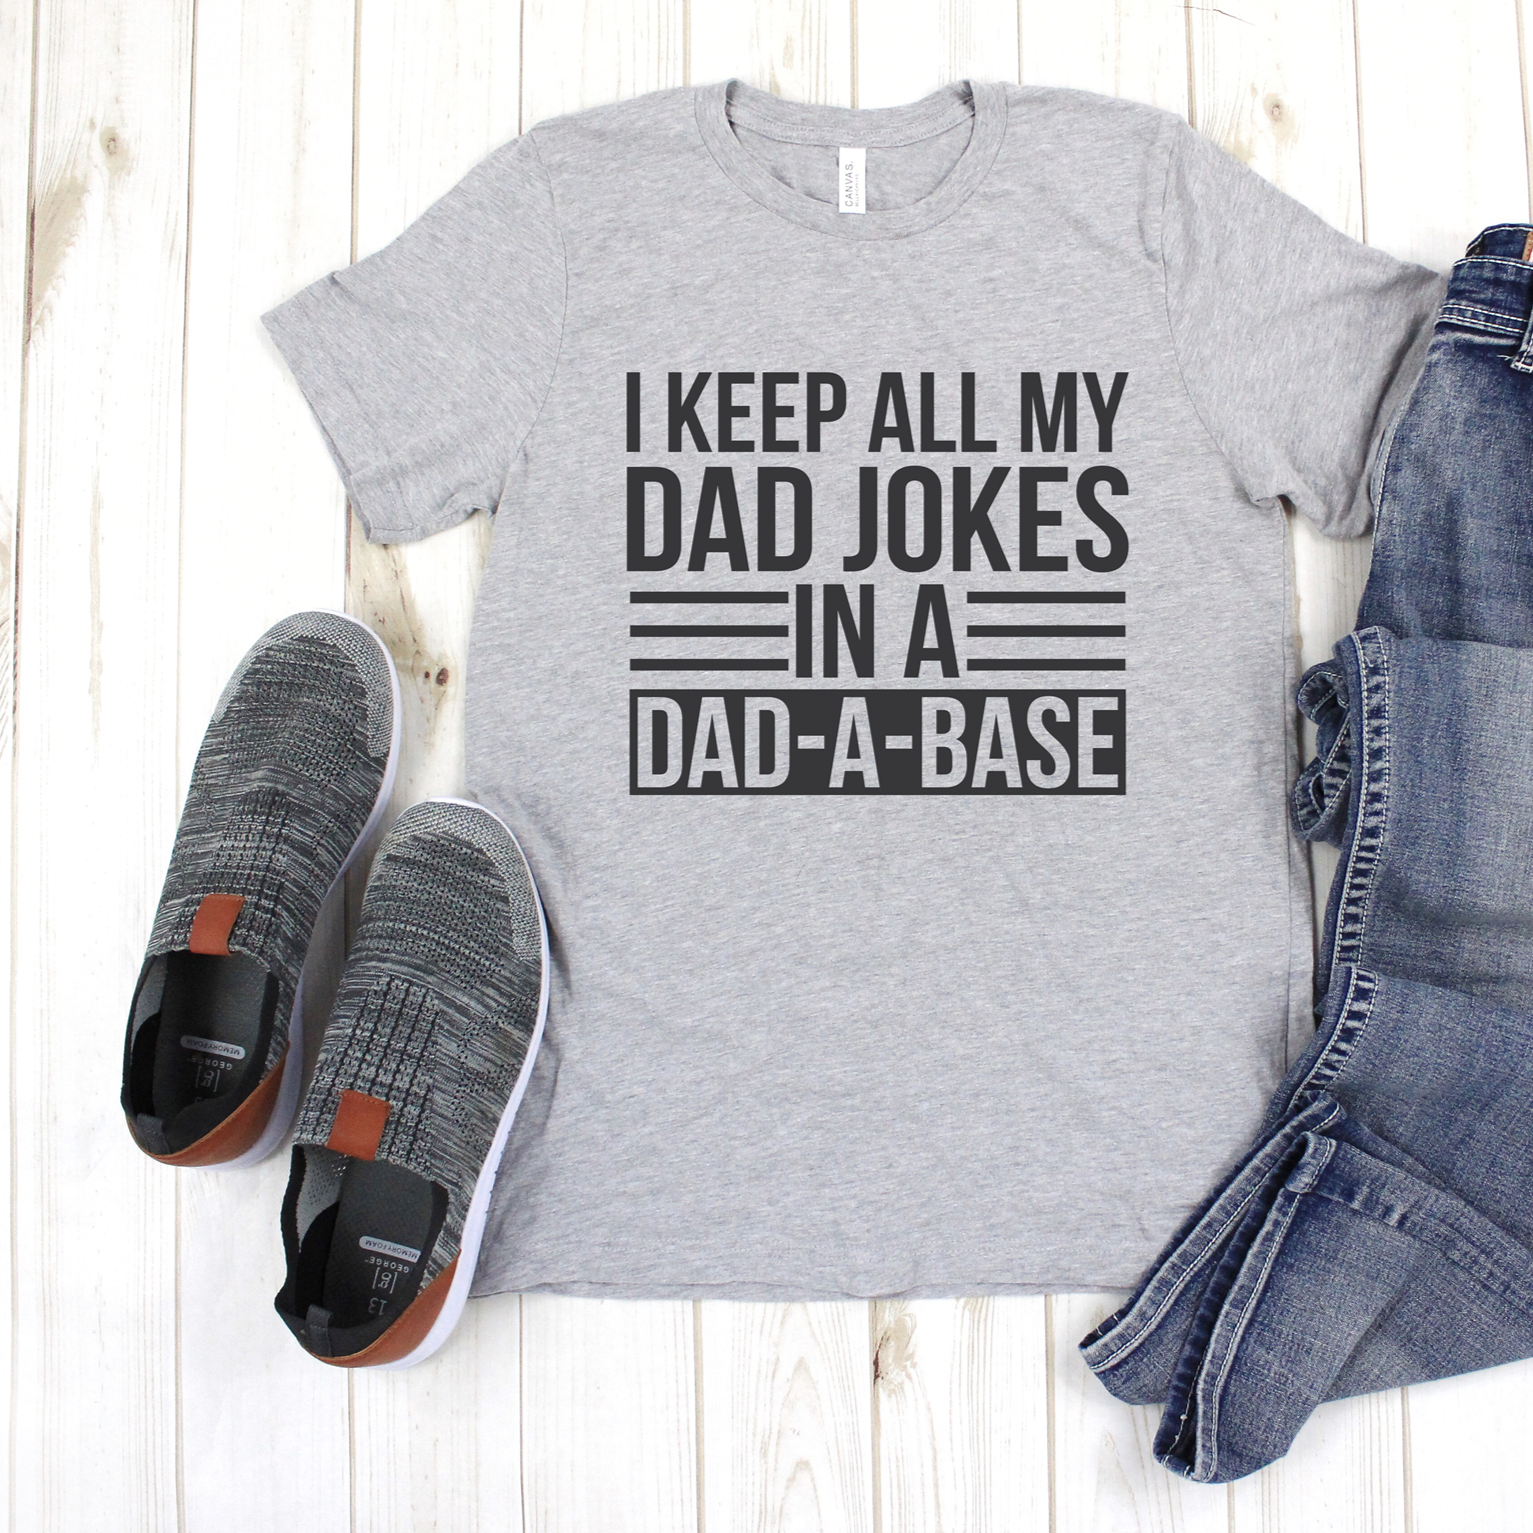 I Keep All My Jokes in a Dad-a-Base Tee